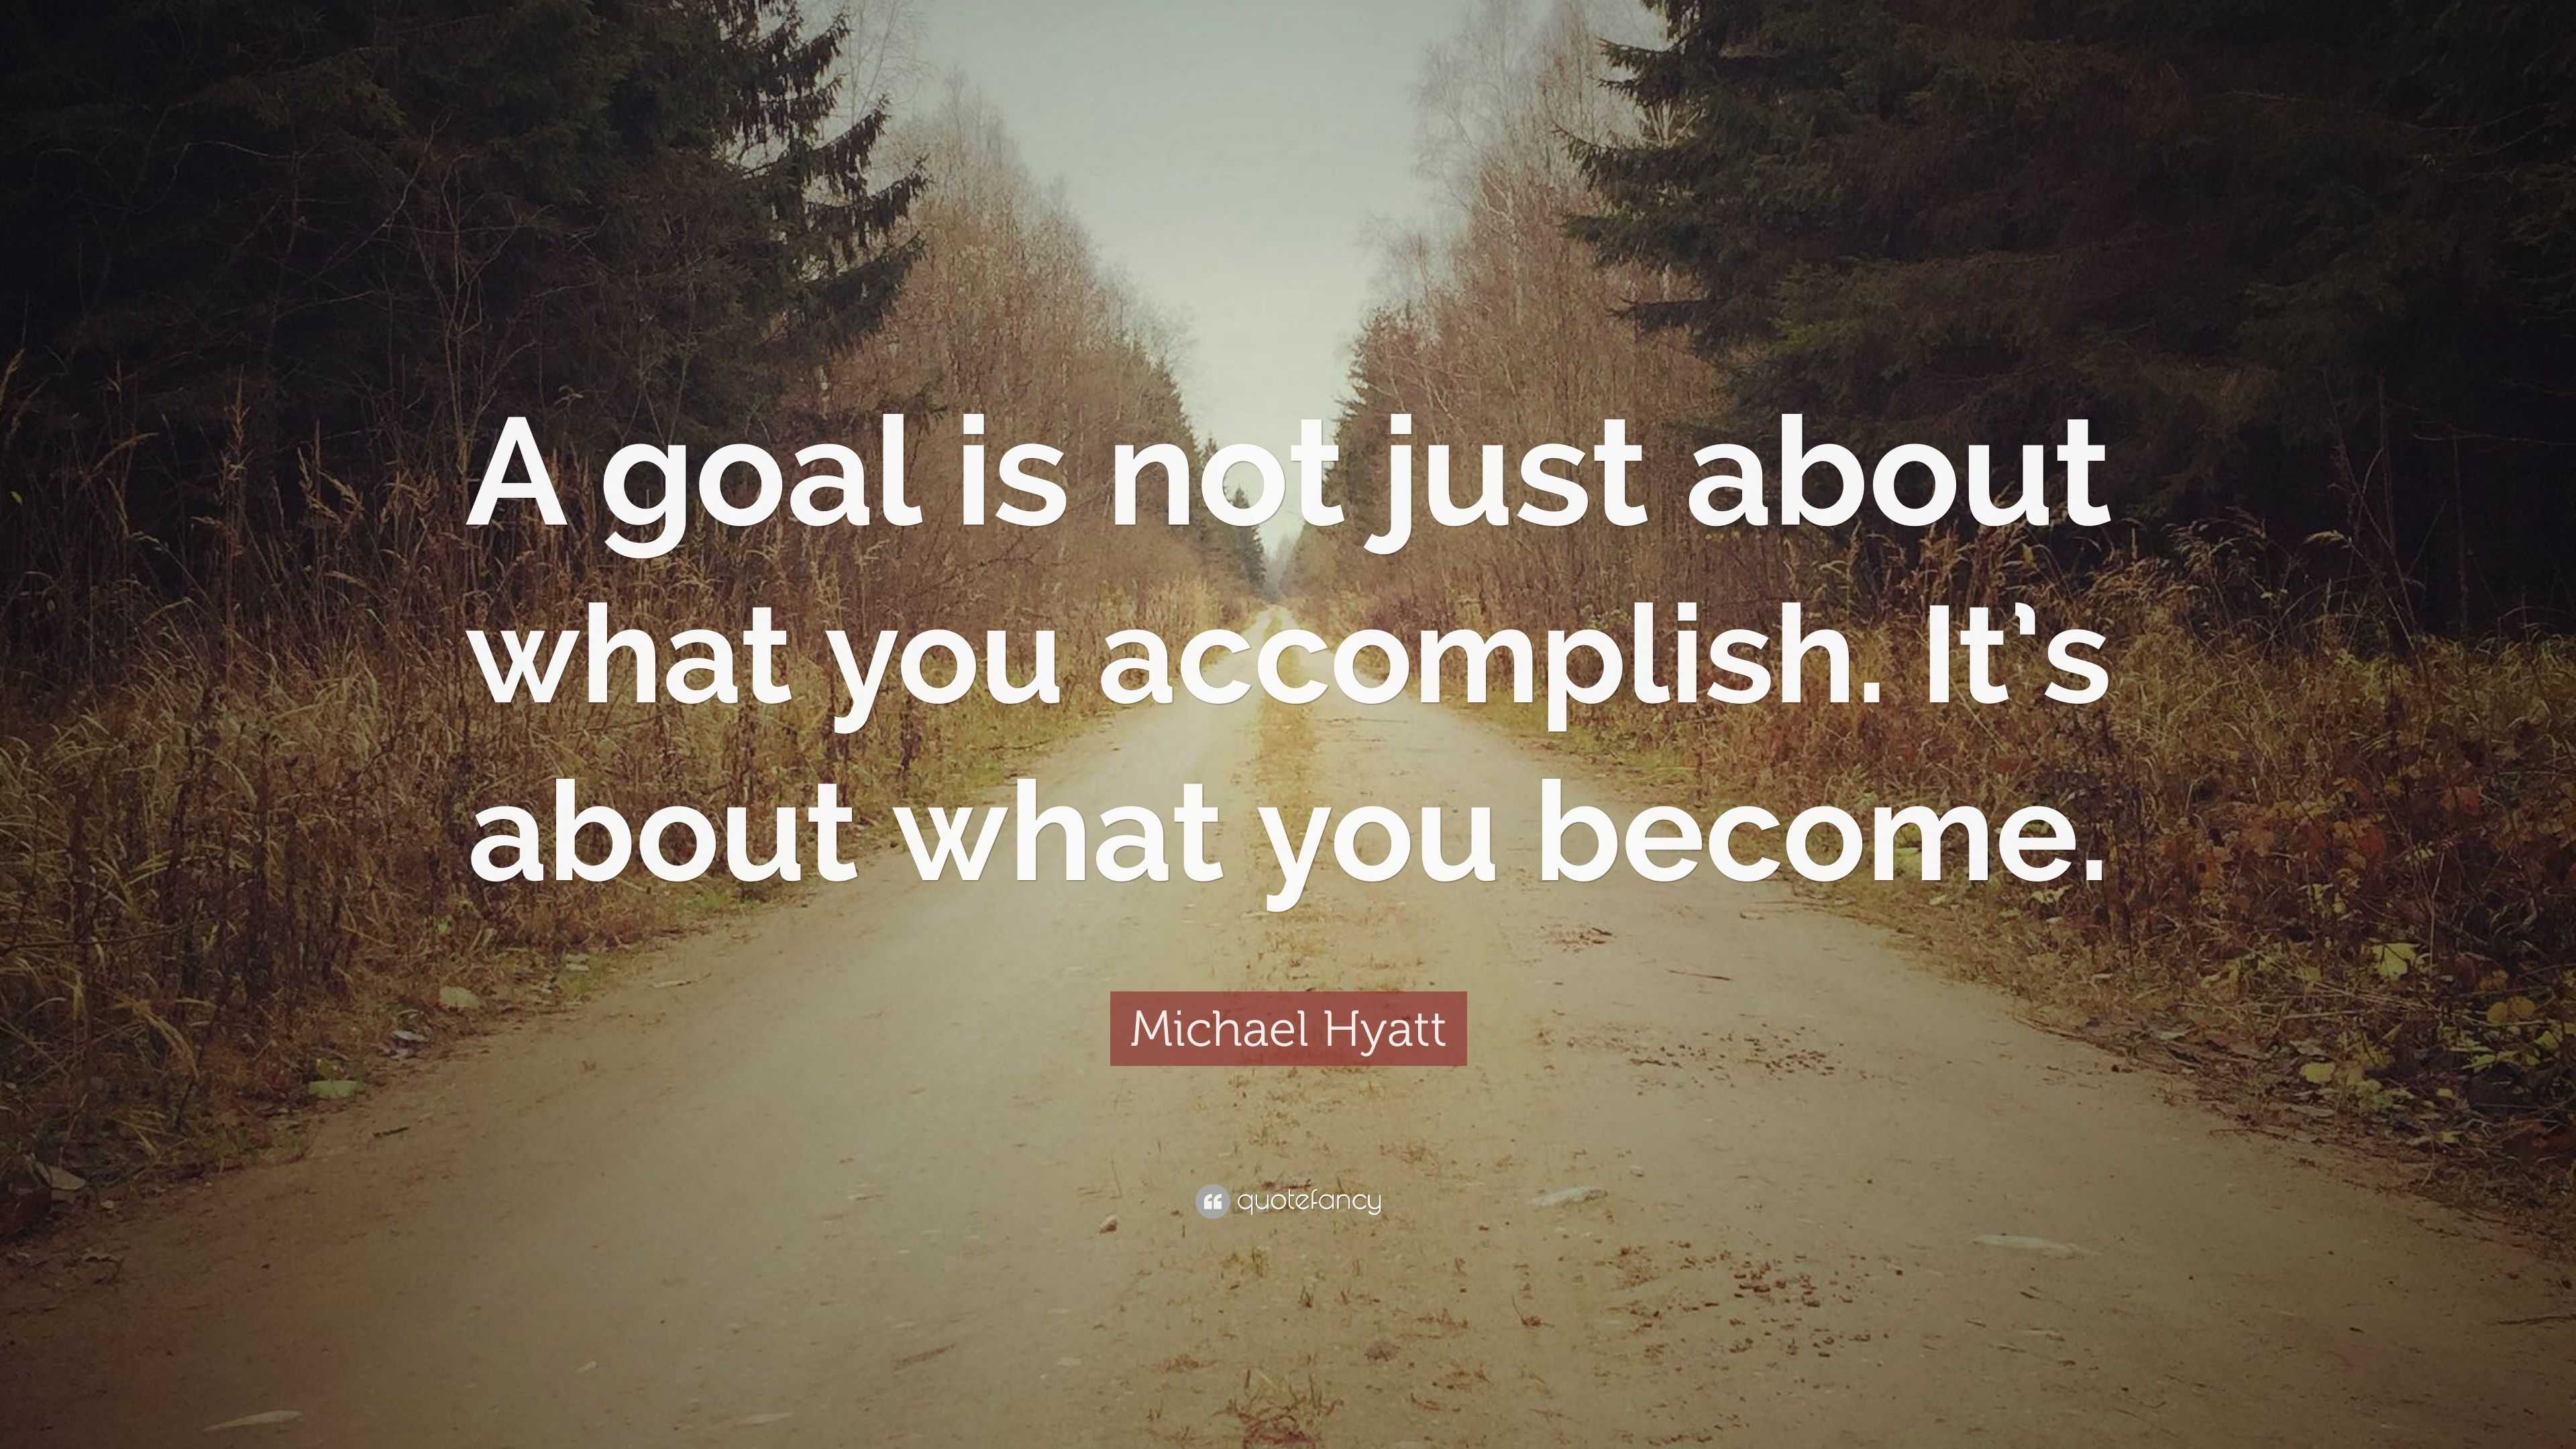 Michael Hyatt Quote: “A goal is not just about what you accomplish. It ...